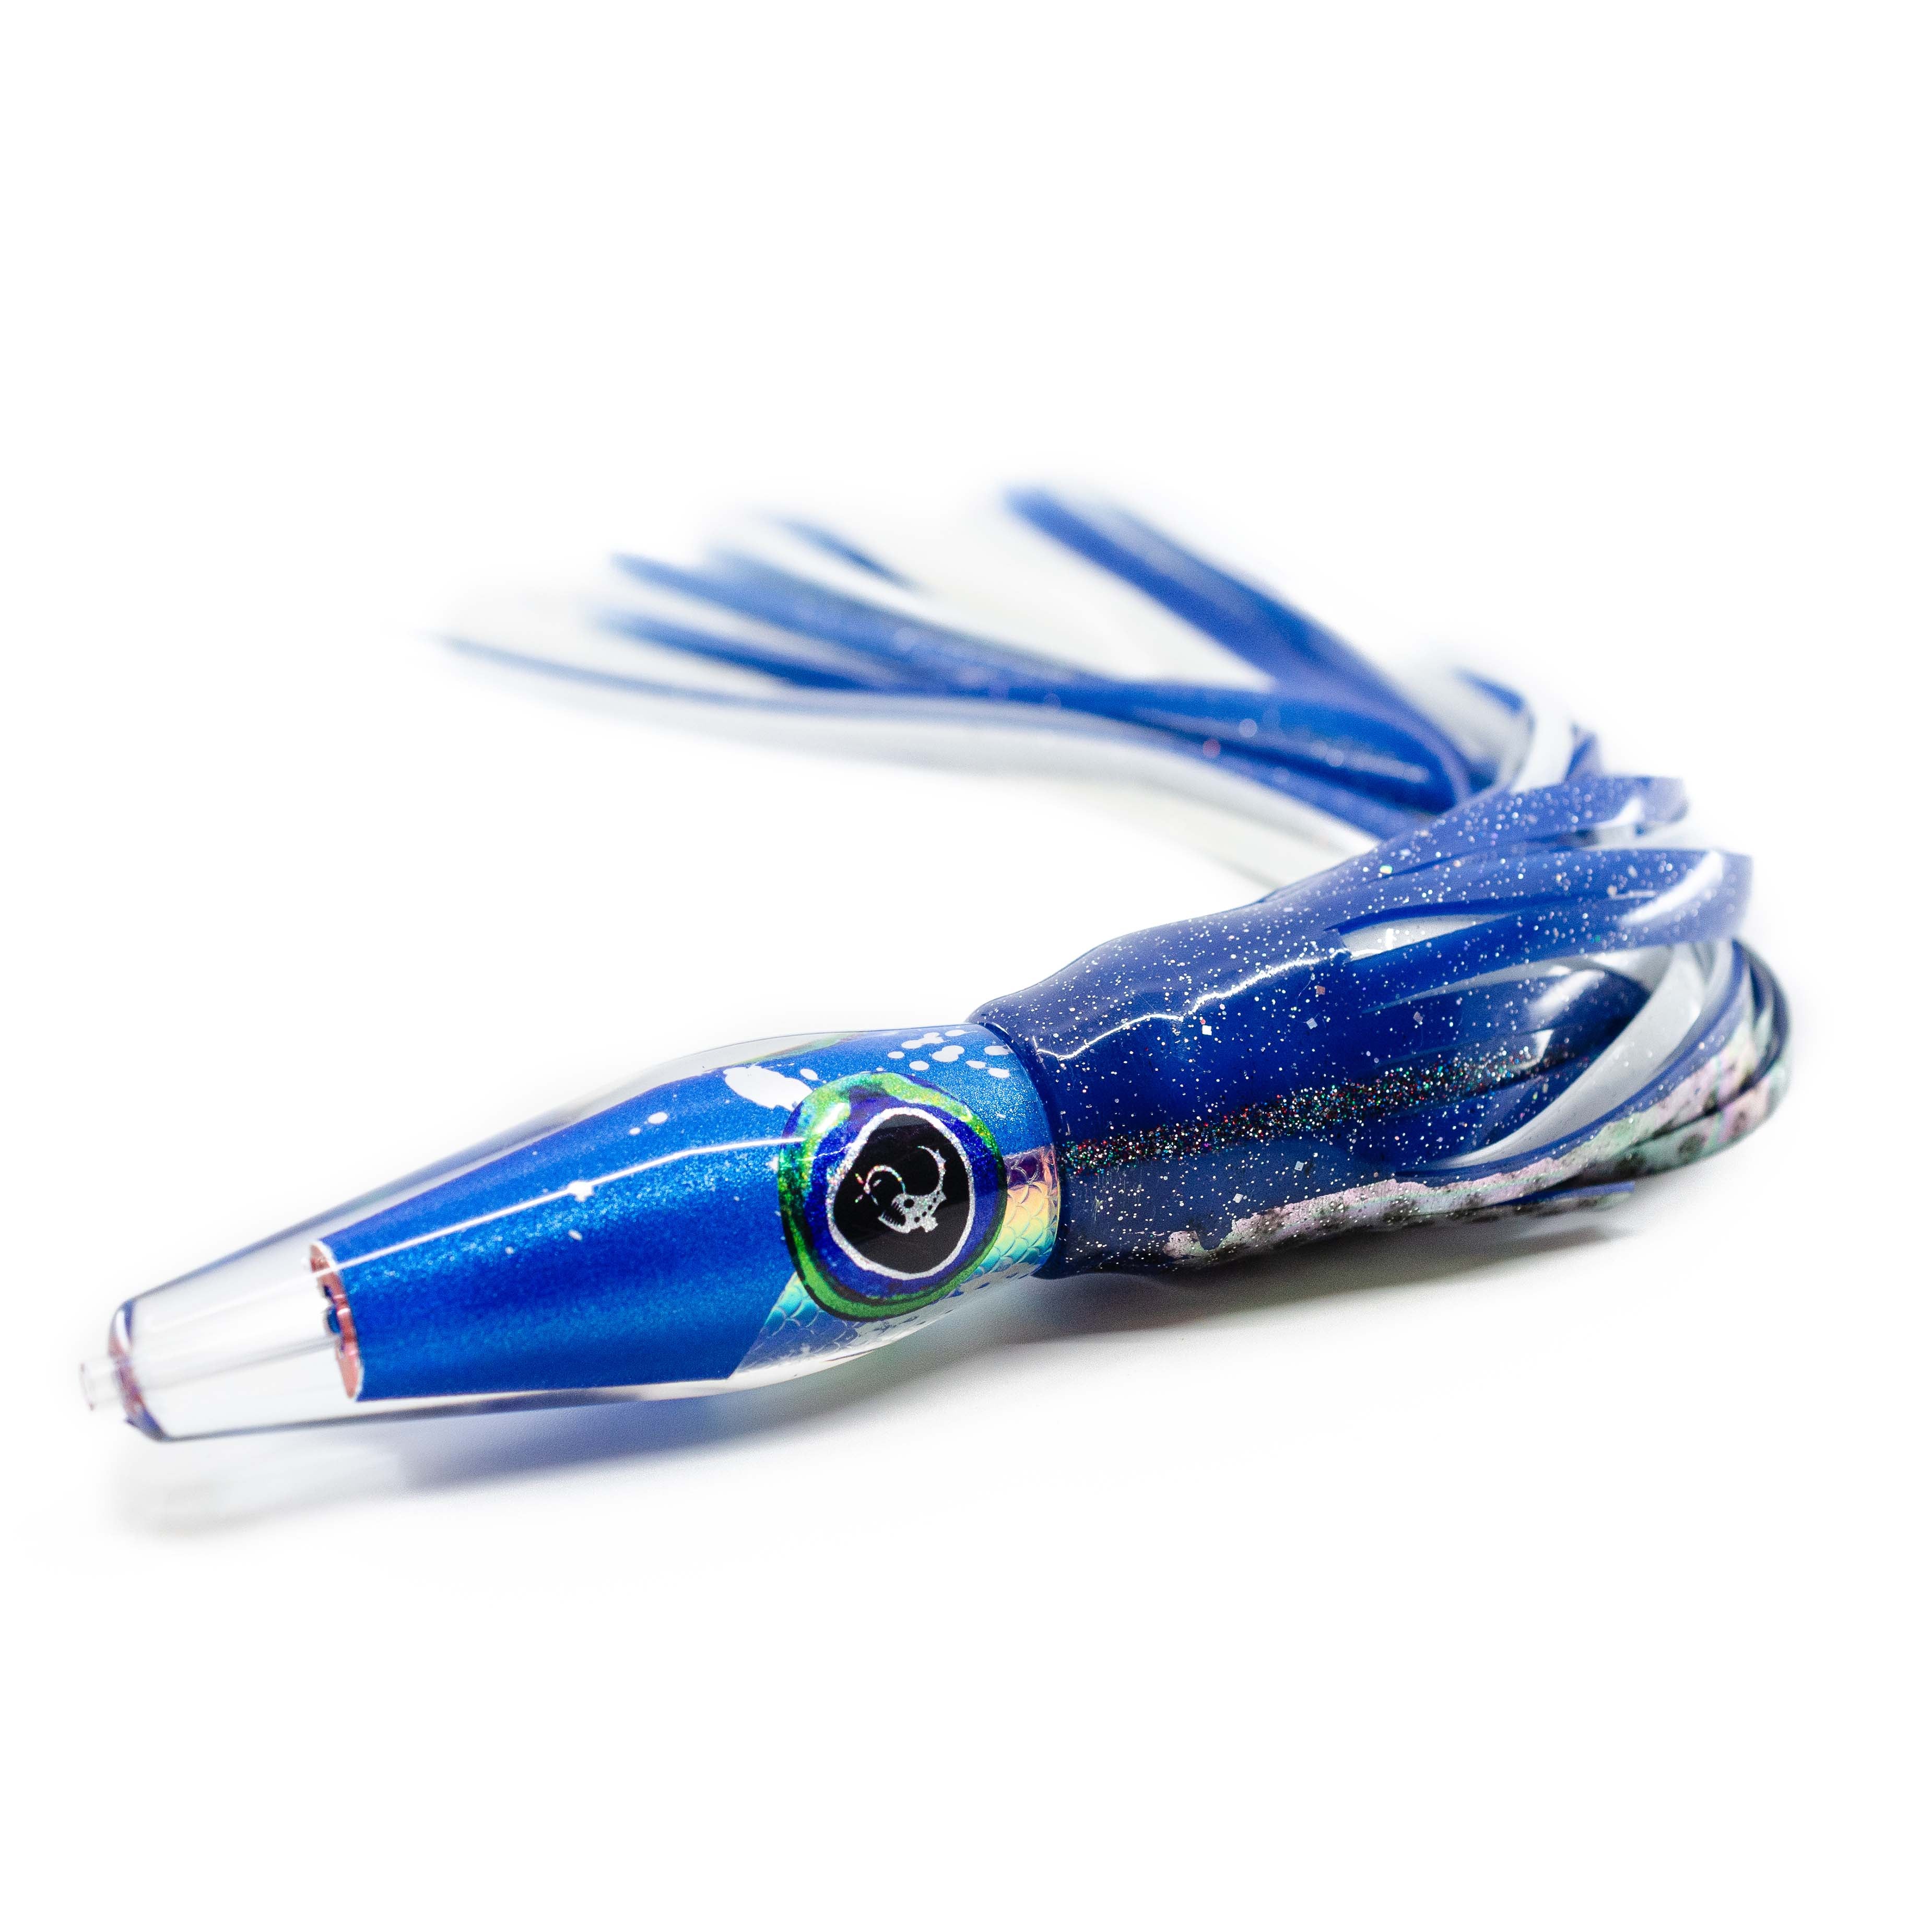 Wahoo Bullet 8.5 is a small metal head lure for high speed